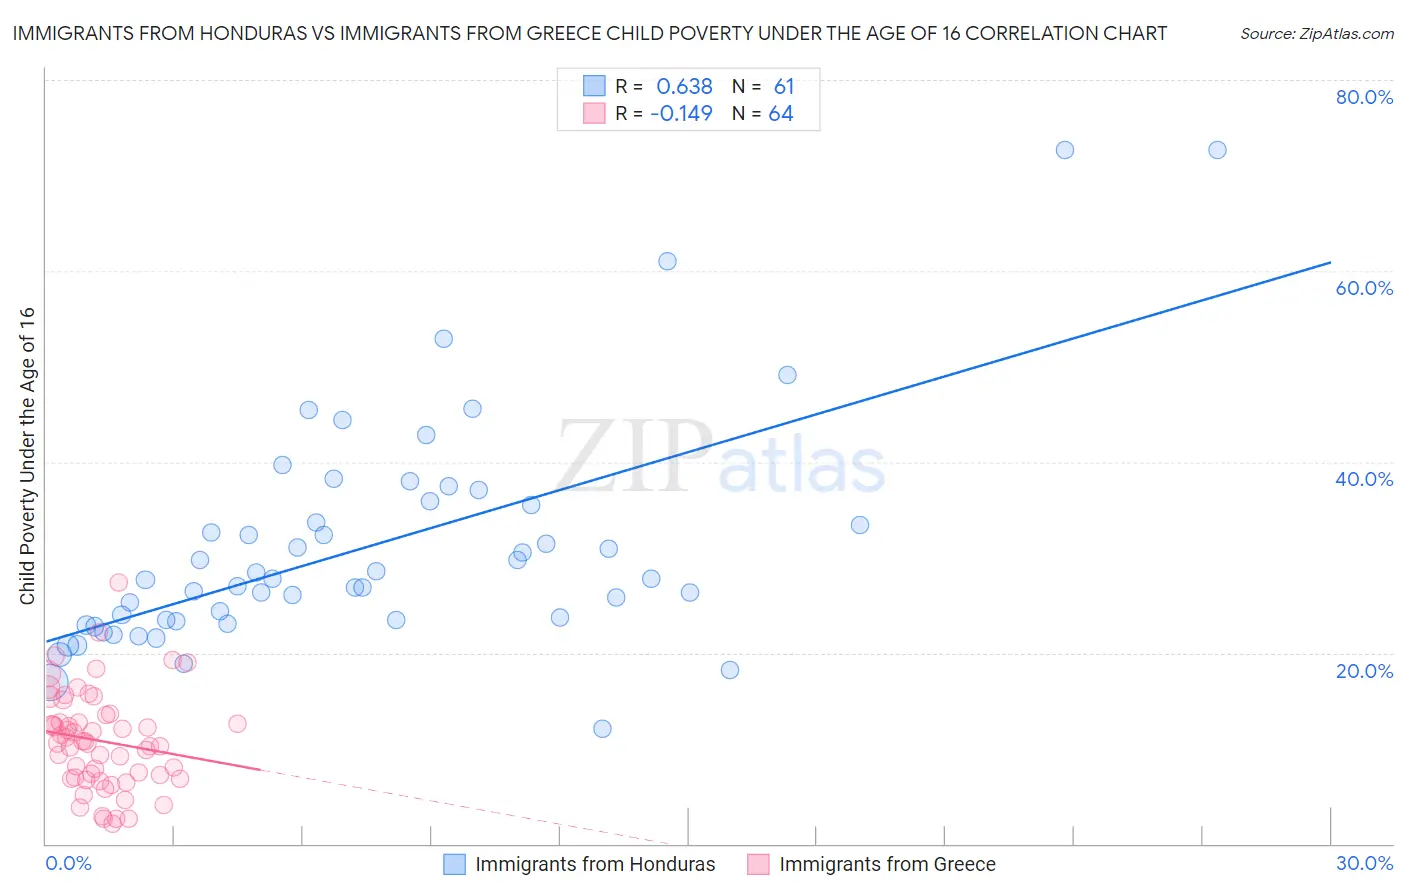 Immigrants from Honduras vs Immigrants from Greece Child Poverty Under the Age of 16